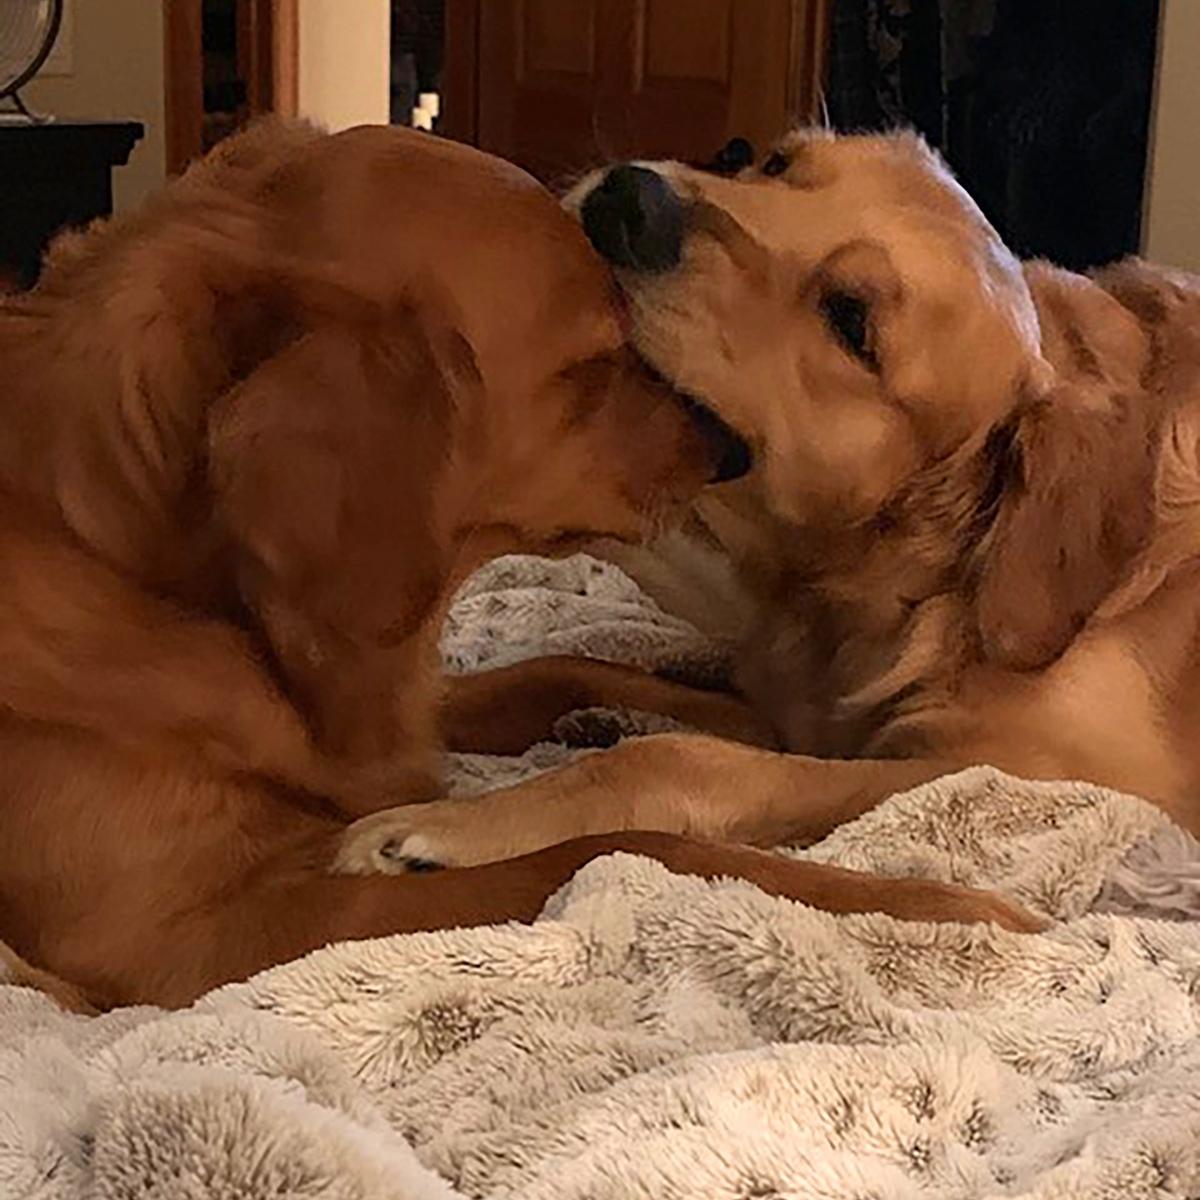 Titan and gracie two golden retrievers playfully engage on a cozy blanket with titan pretending to nibble on gracies ear showcasing their strong bond and playful spirits